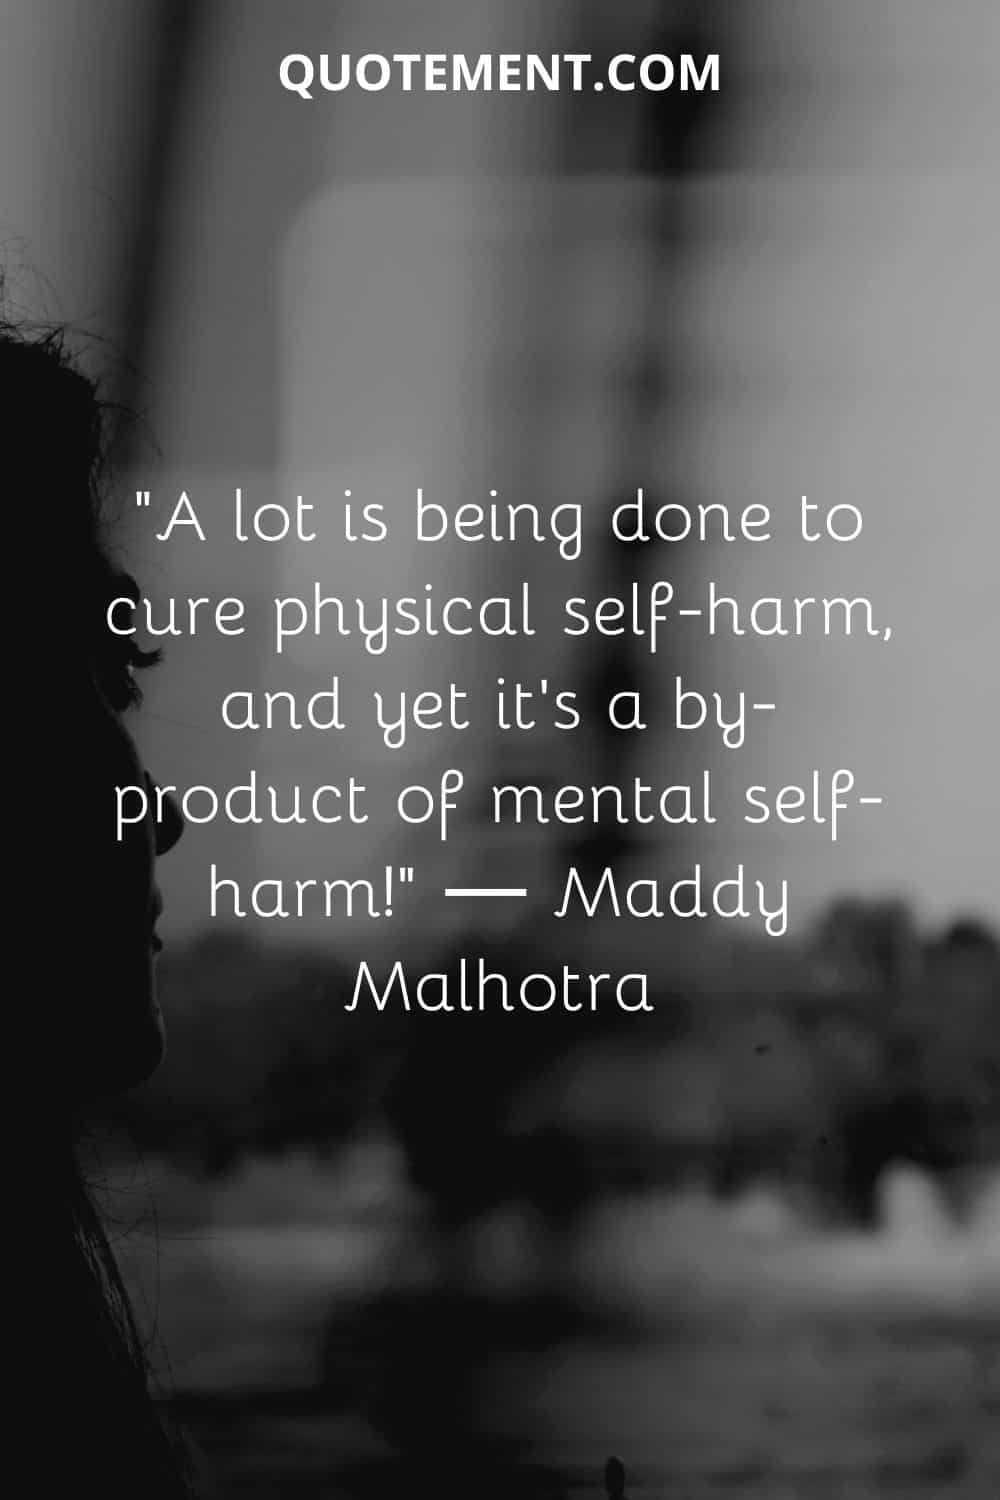 A lot is being done to cure physical self-harm